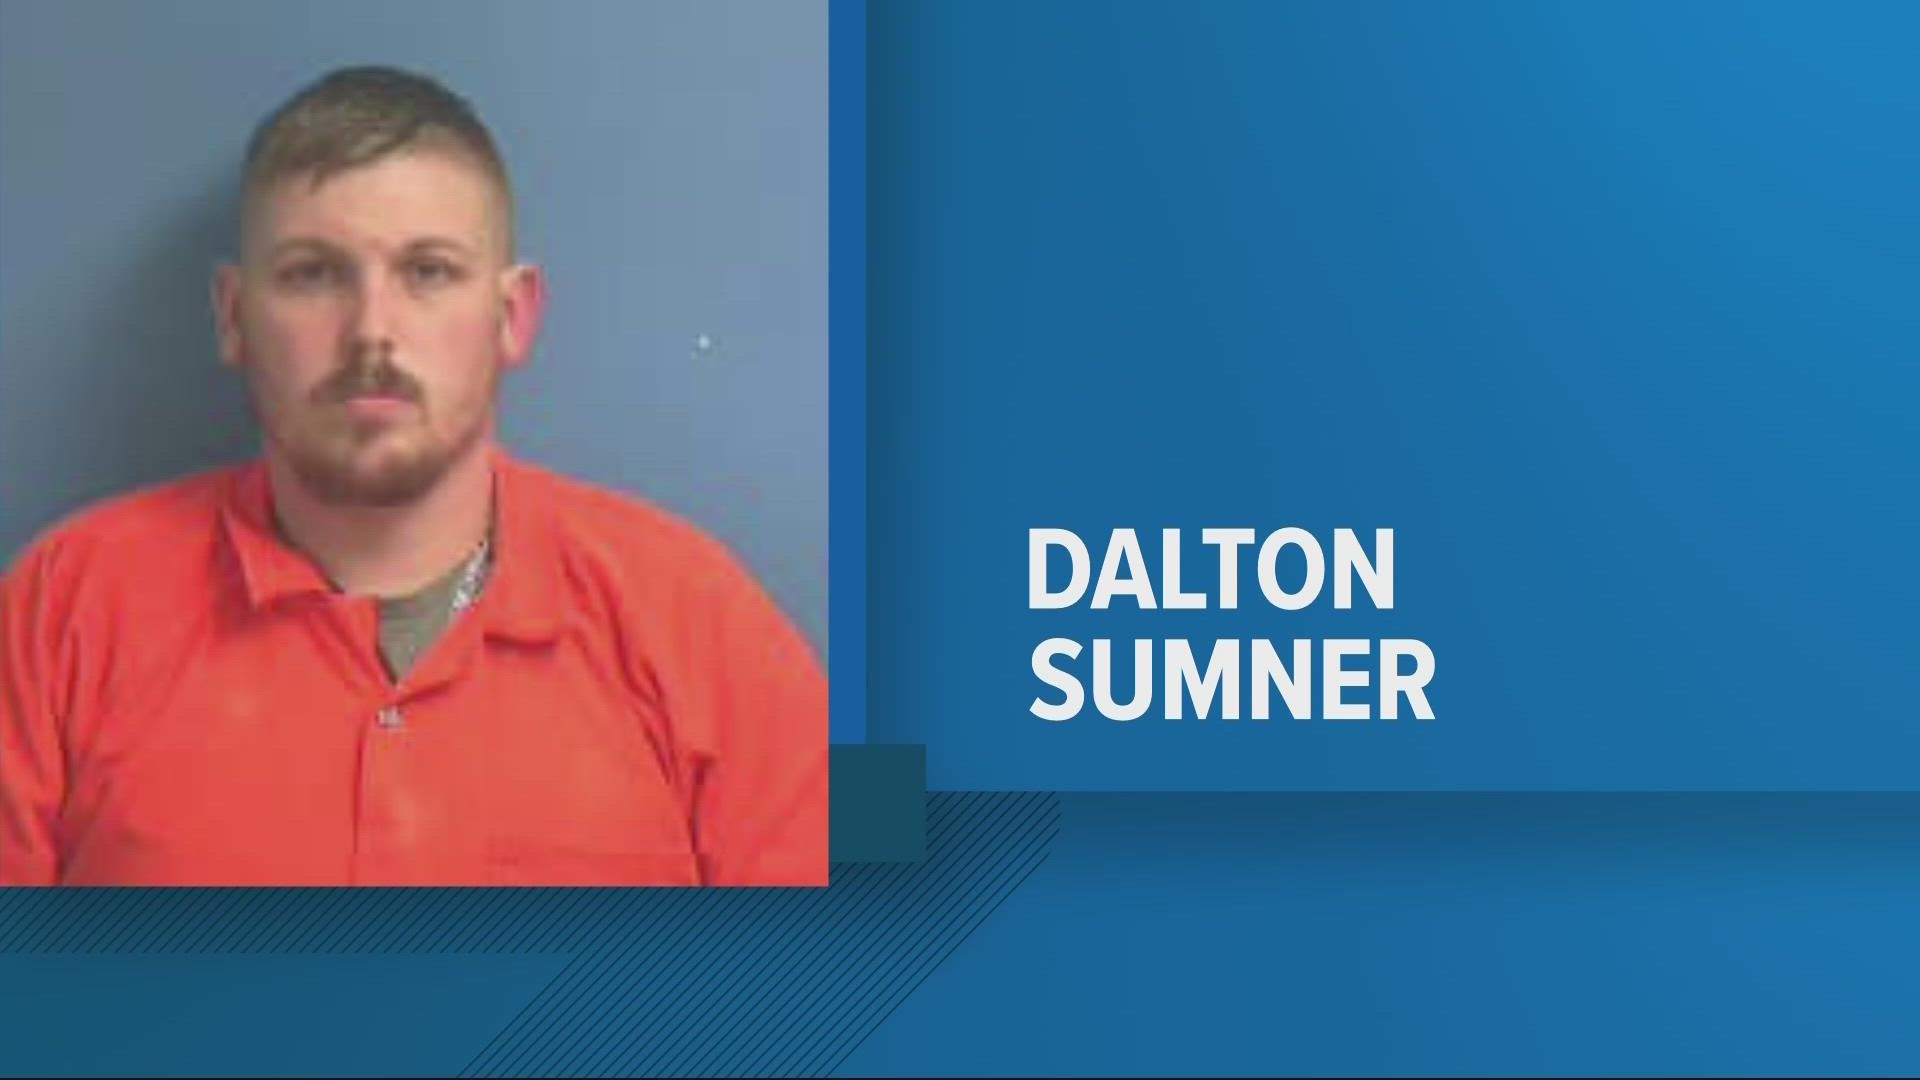 After an arrest warrant was issued for 'sexual battery on victim 18 or older with special circumstances', Dalton Sumner surrendered himself.